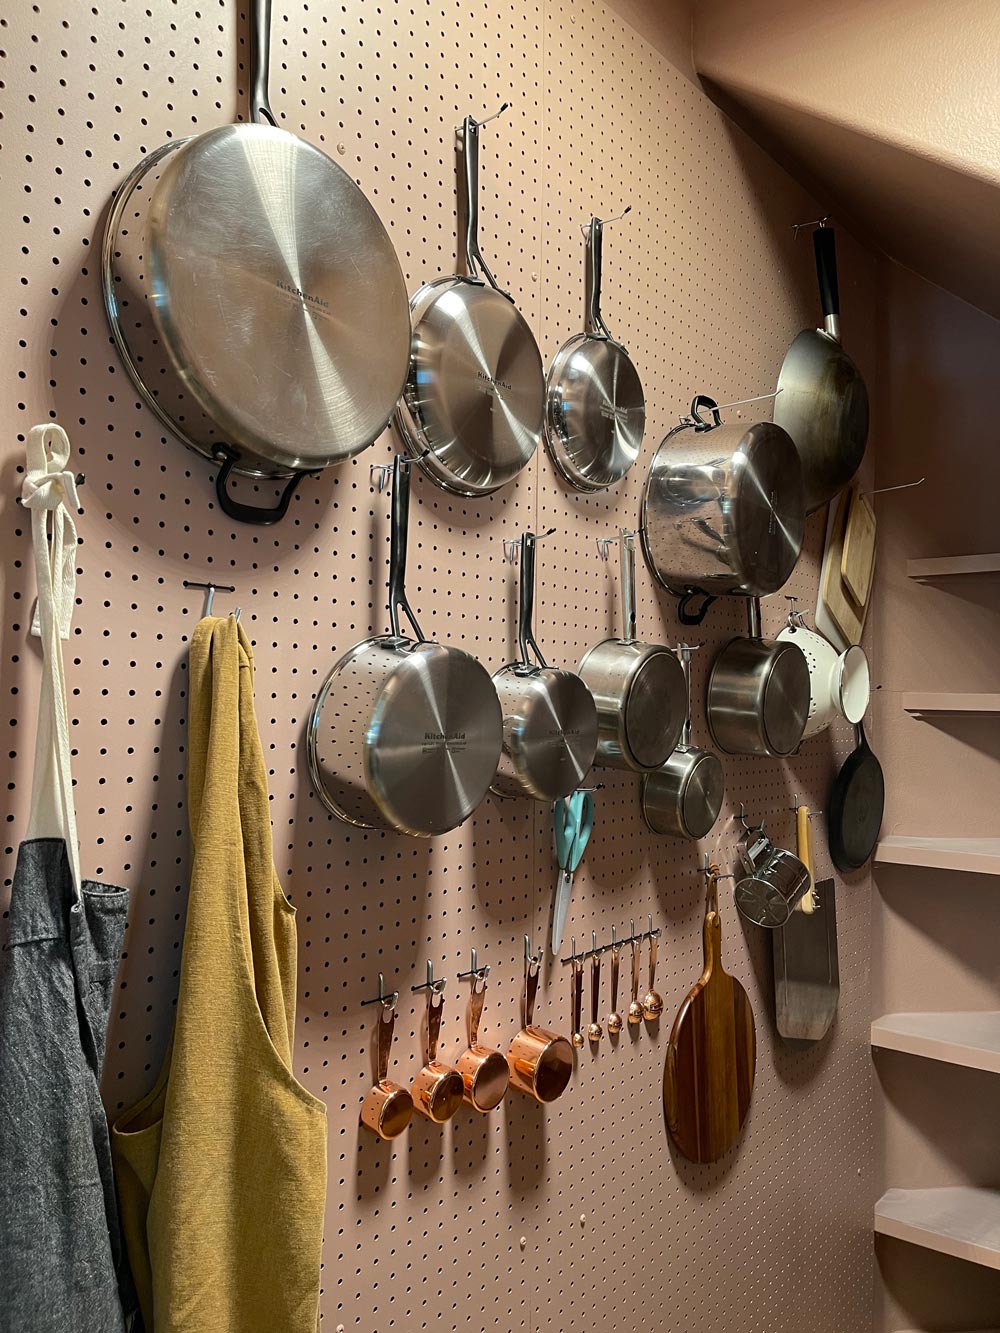 Pots, pans, aprons, and measuring cups on the pegboard wall. 